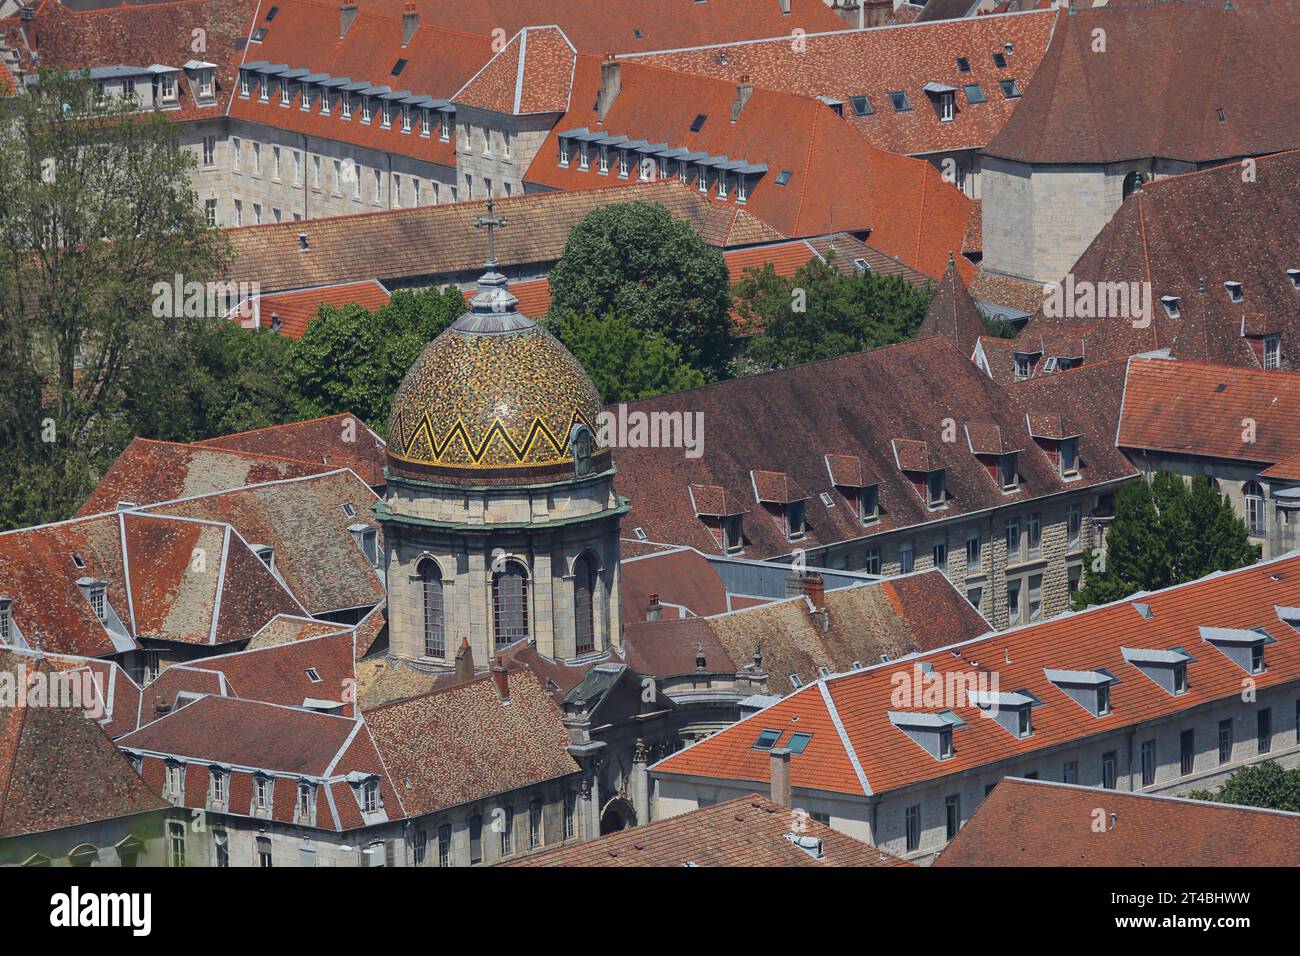 View of roofs and dome of Notre-Dame du Refuge, Cathedral, Church, Besancon, Besancon, Doubs, France Stock Photo